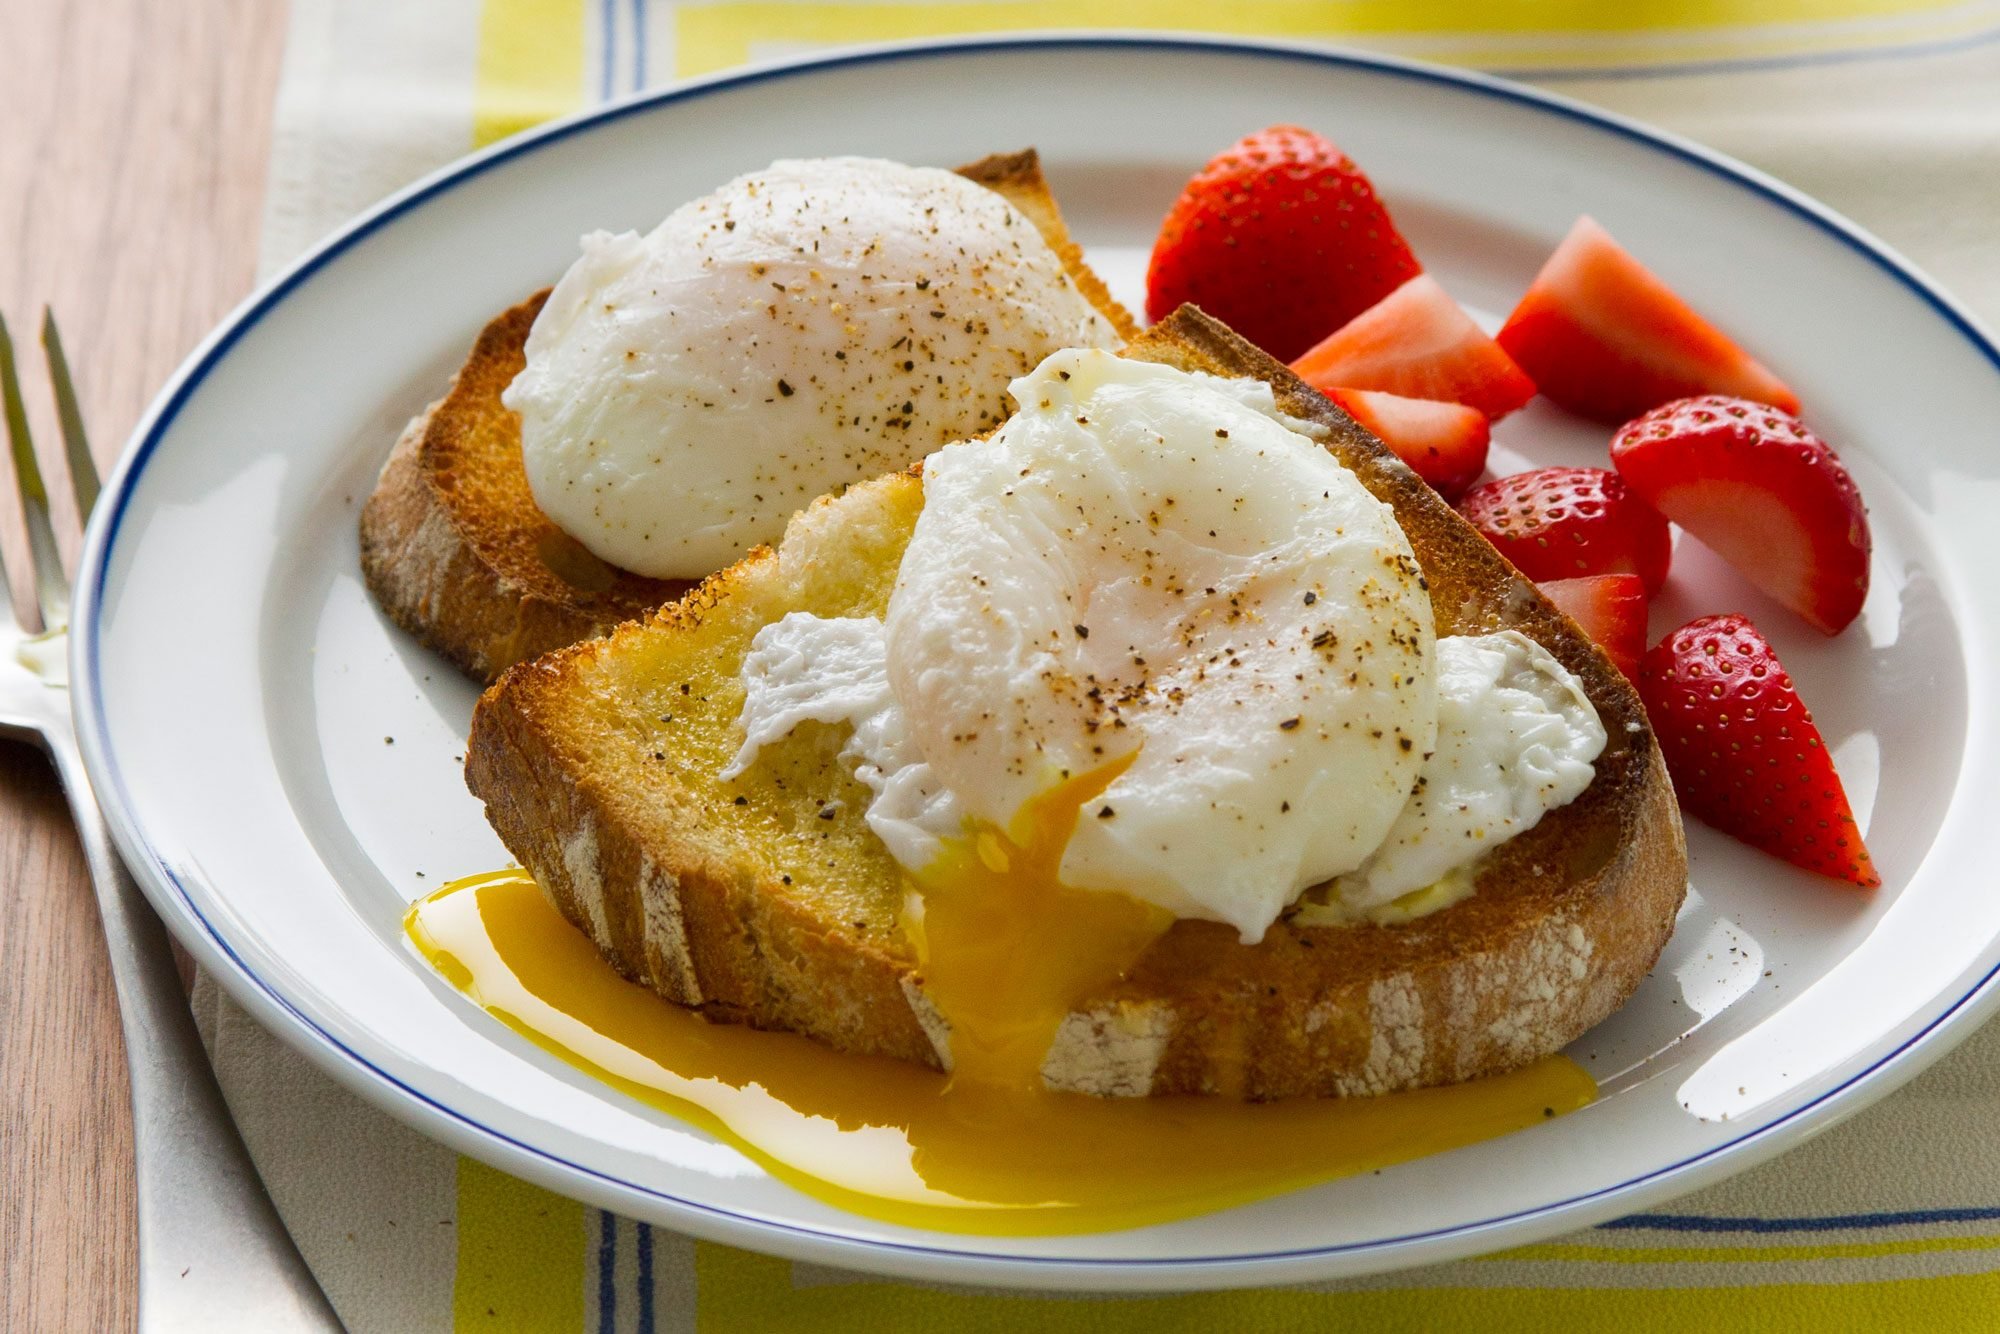 poached eggs on toast and strawberries on a white plate on a table next to a fork. the yolk from one egg has been broken and is dripping onto the toast and plate